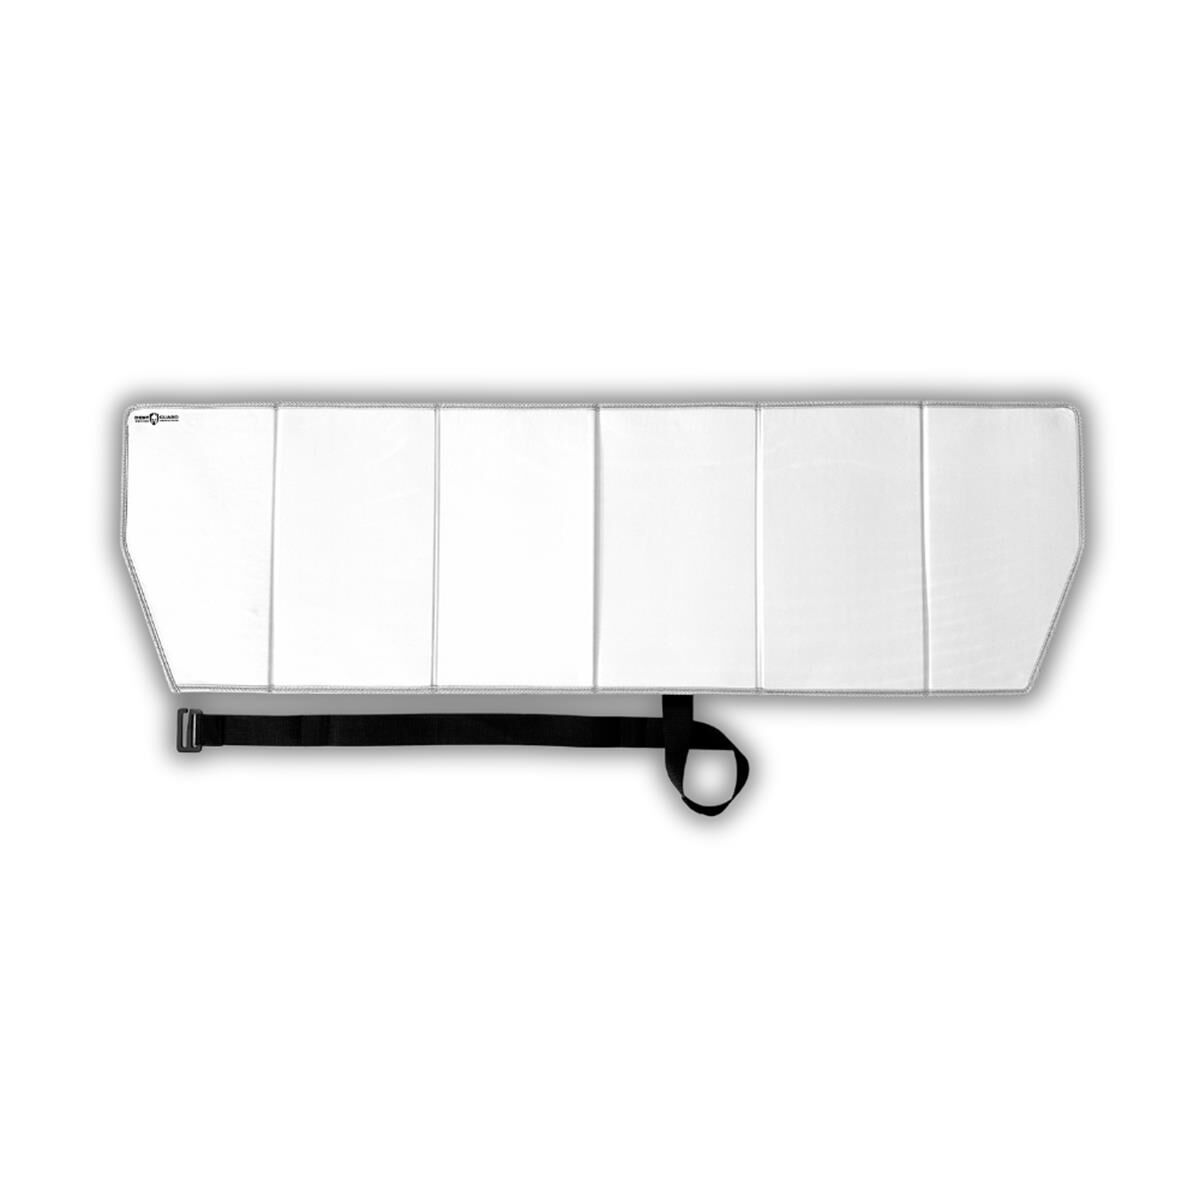 WHITE DENT GUARD WITH SAFE MAGNET ATTACHMENT, , scaau_hi-res